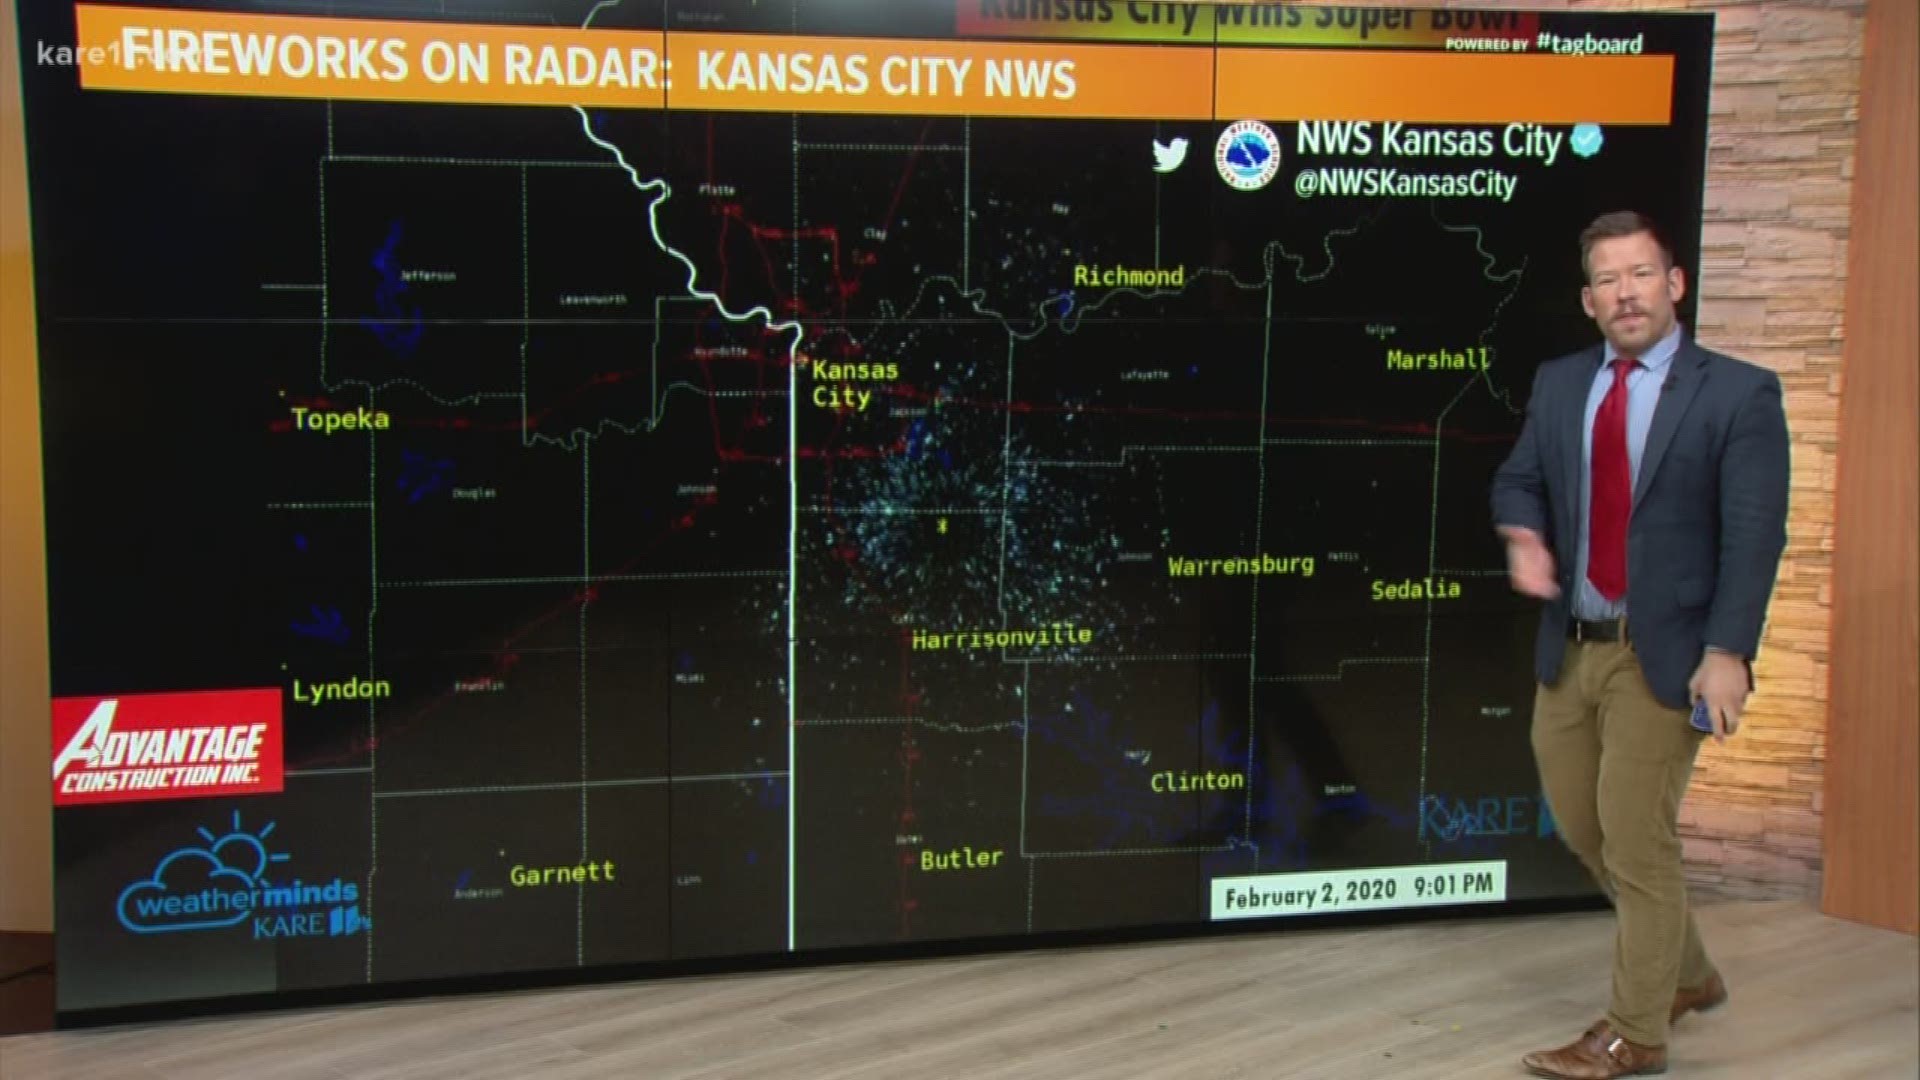 The fireworks to celebrate Kansas City's victory were caught on the National Weather Services weather radar Sunday night.